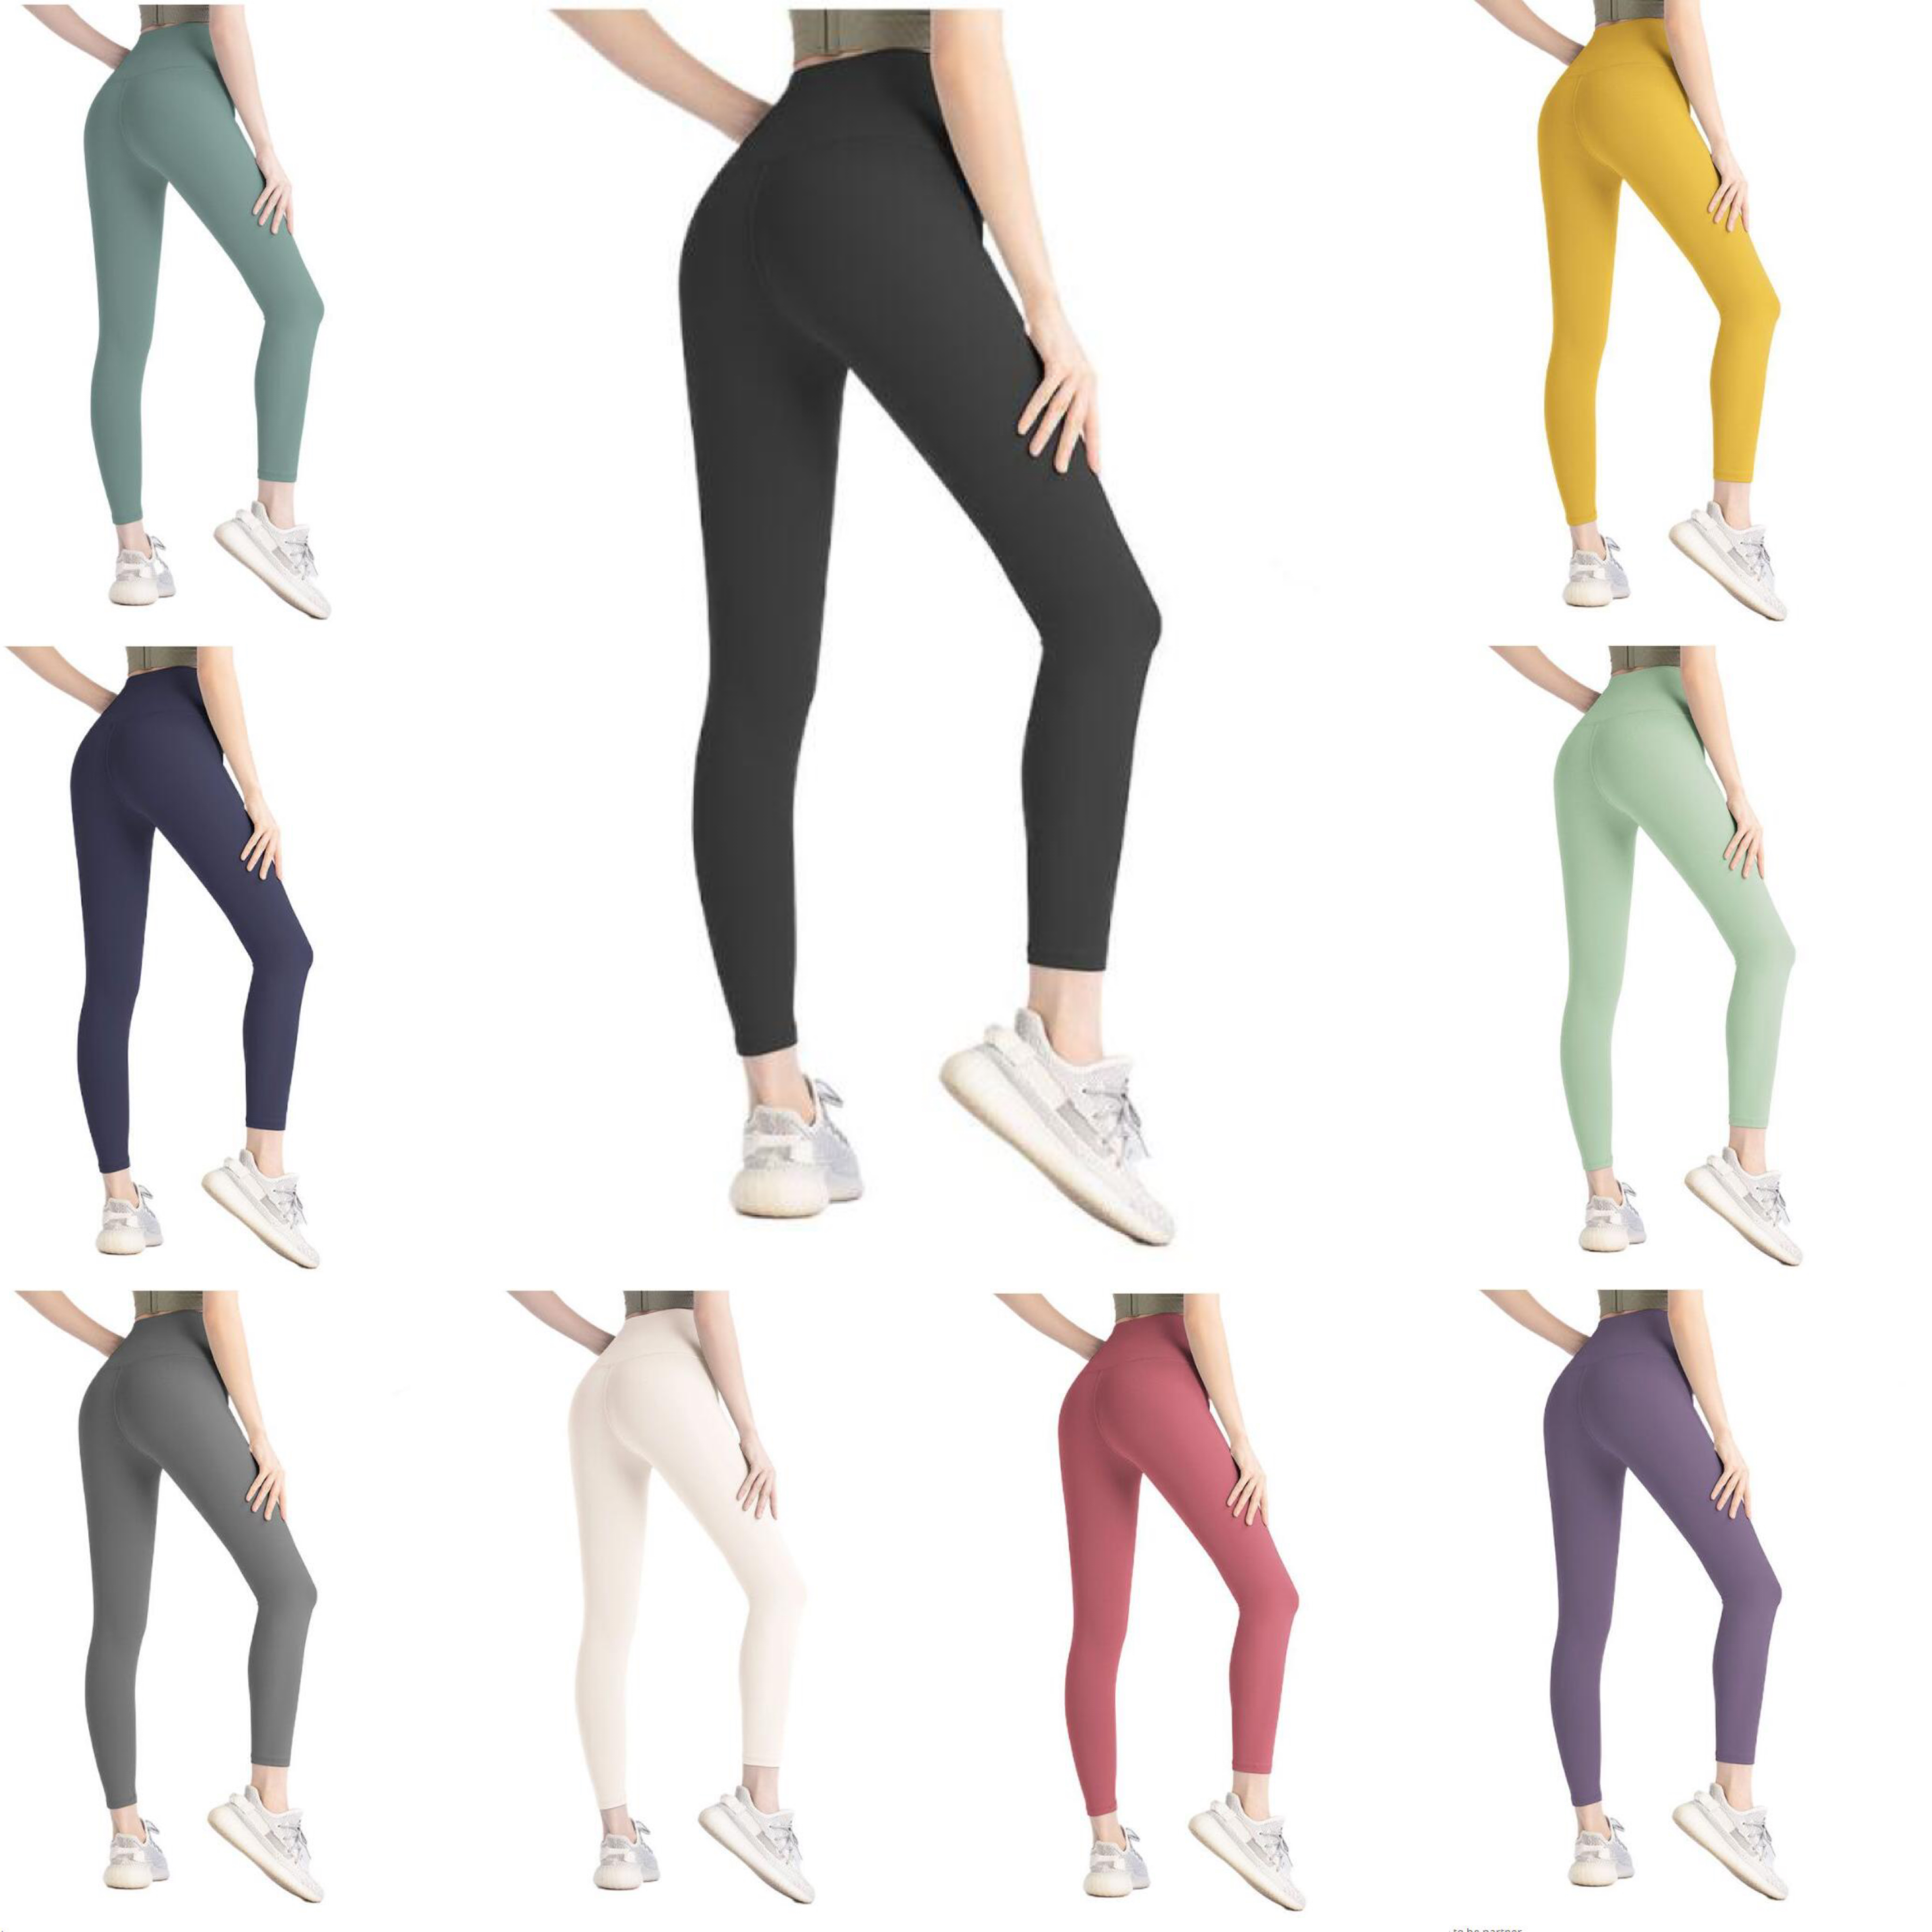 2023 Yoga lu align leggings Women Shorts Cropped pants Outfits Lady Sports yoga Ladies Pants Exercise Fitness Wear Girls Running Leggings gy